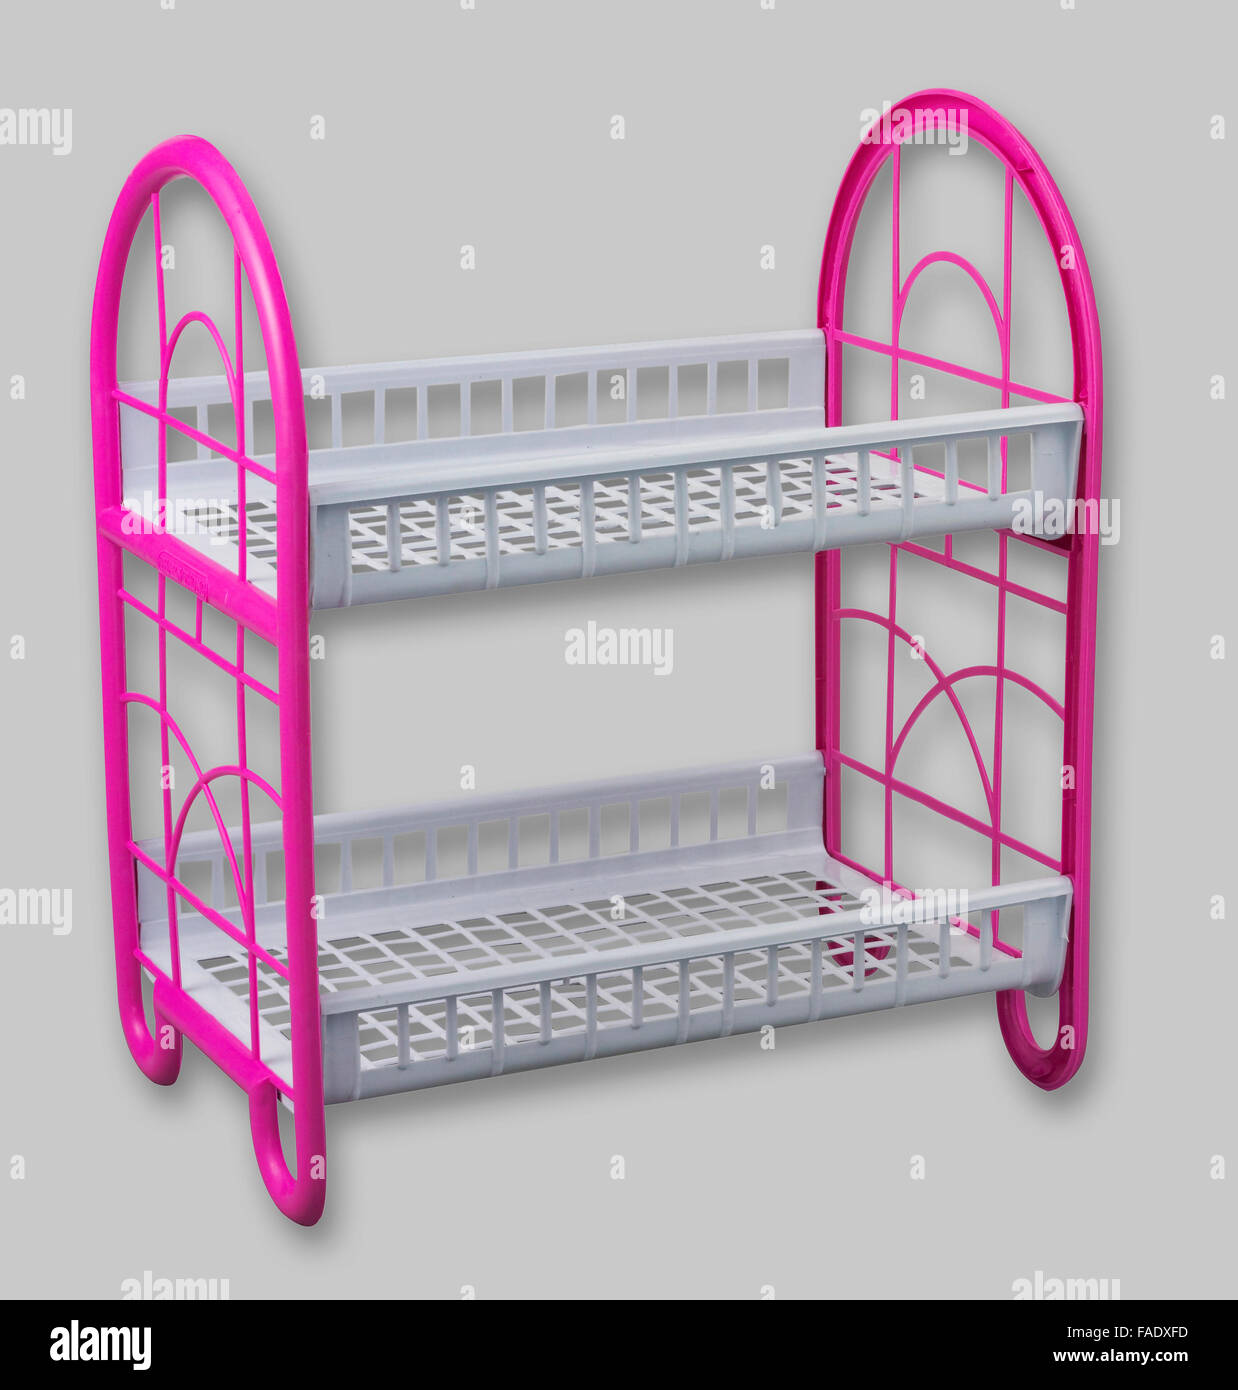 45 Pink Dish Drying Rack Images, Stock Photos, 3D objects, & Vectors